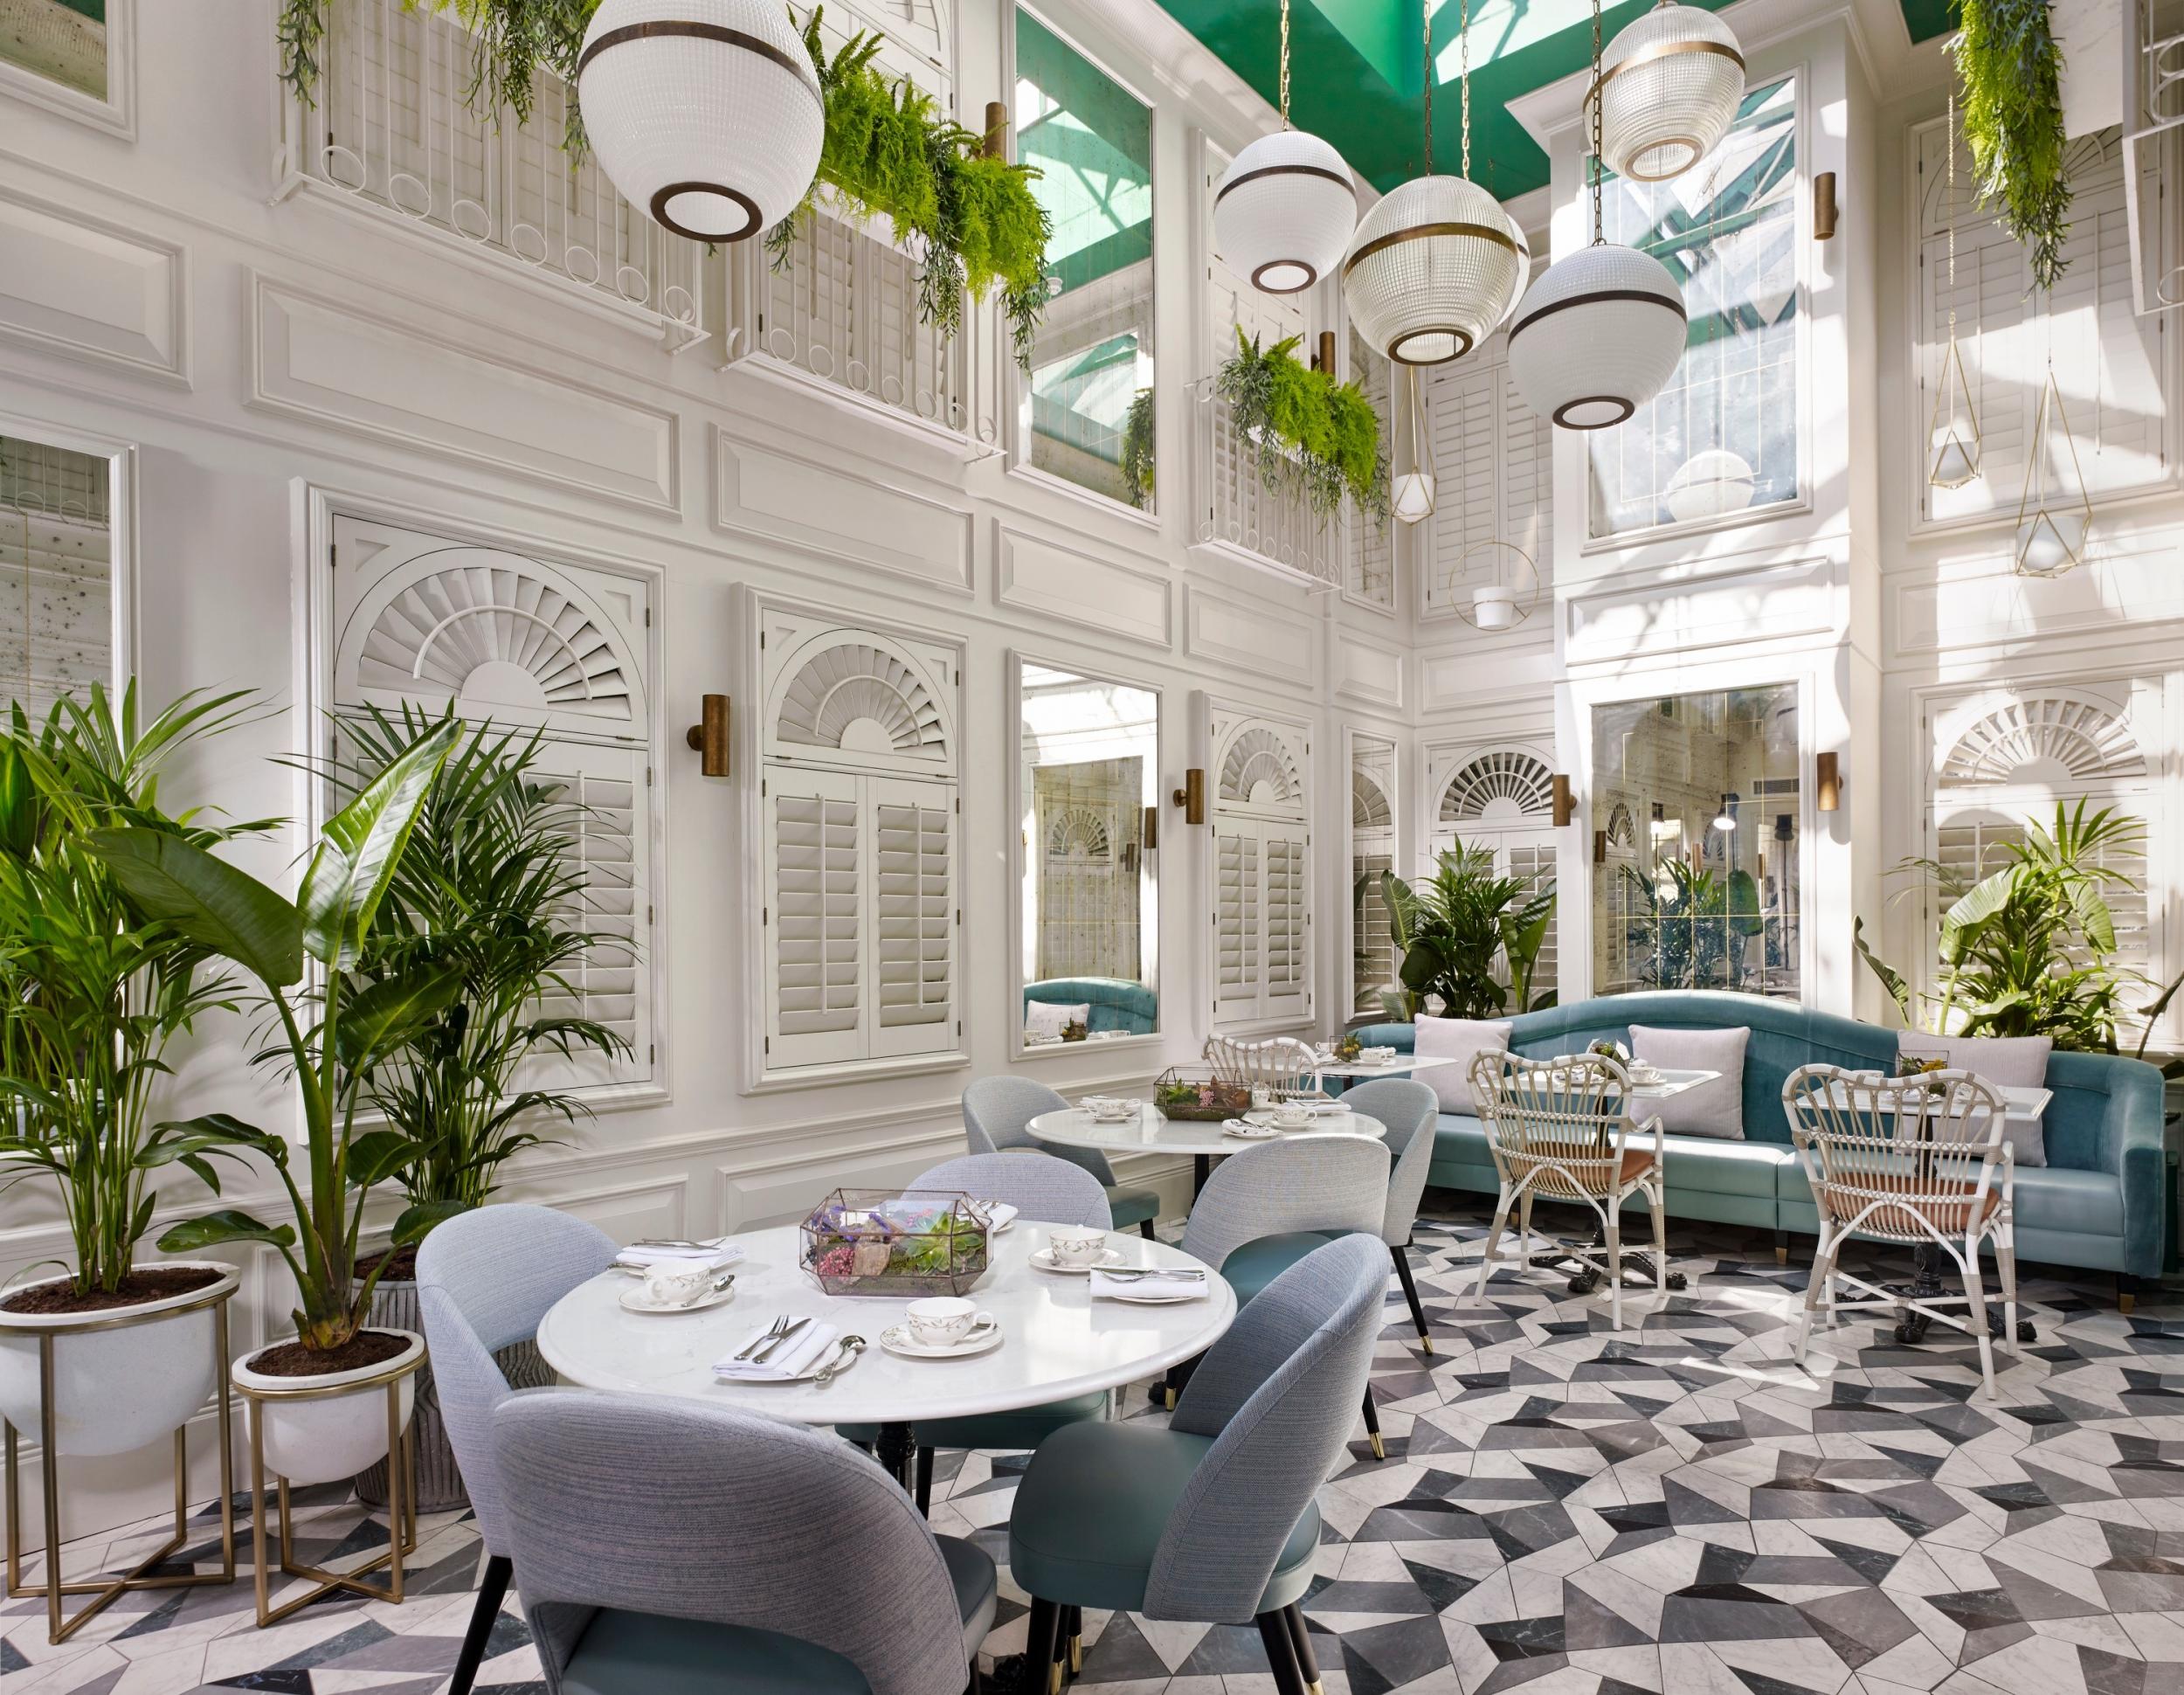 The light, plant-filled Botanica where afternoon tea is served